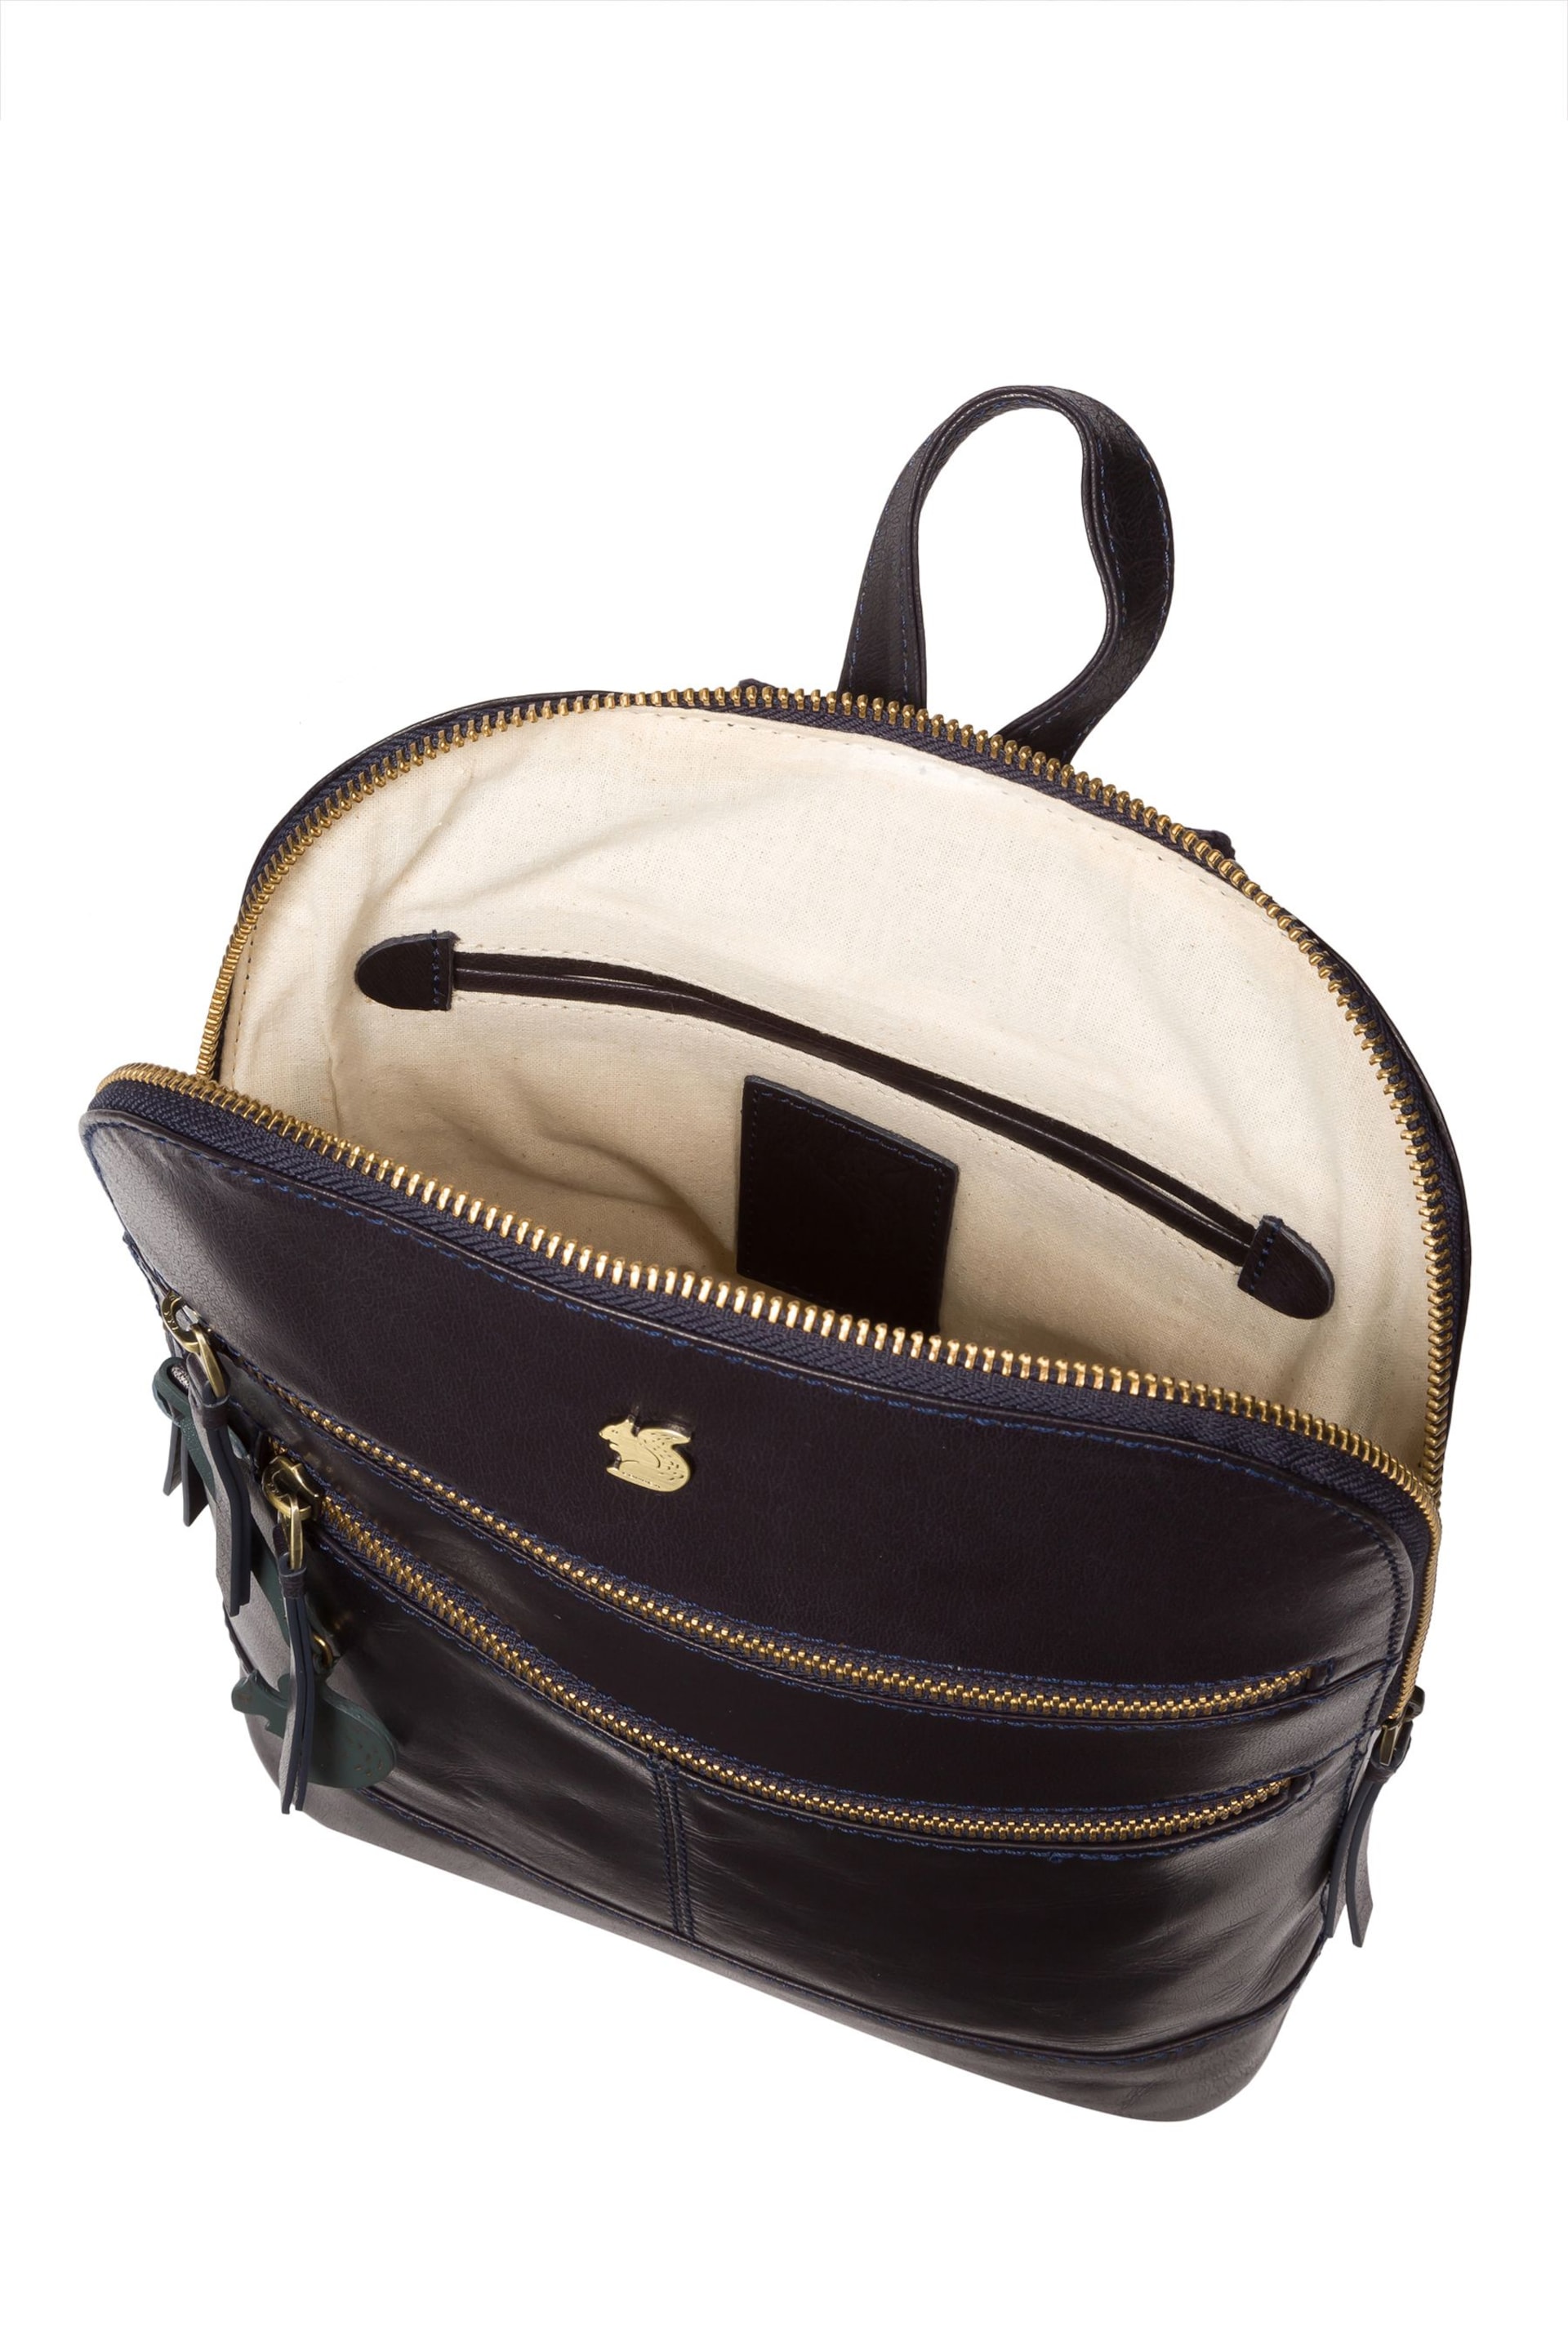 Conkca Francisca Leather Backpack - Image 5 of 6